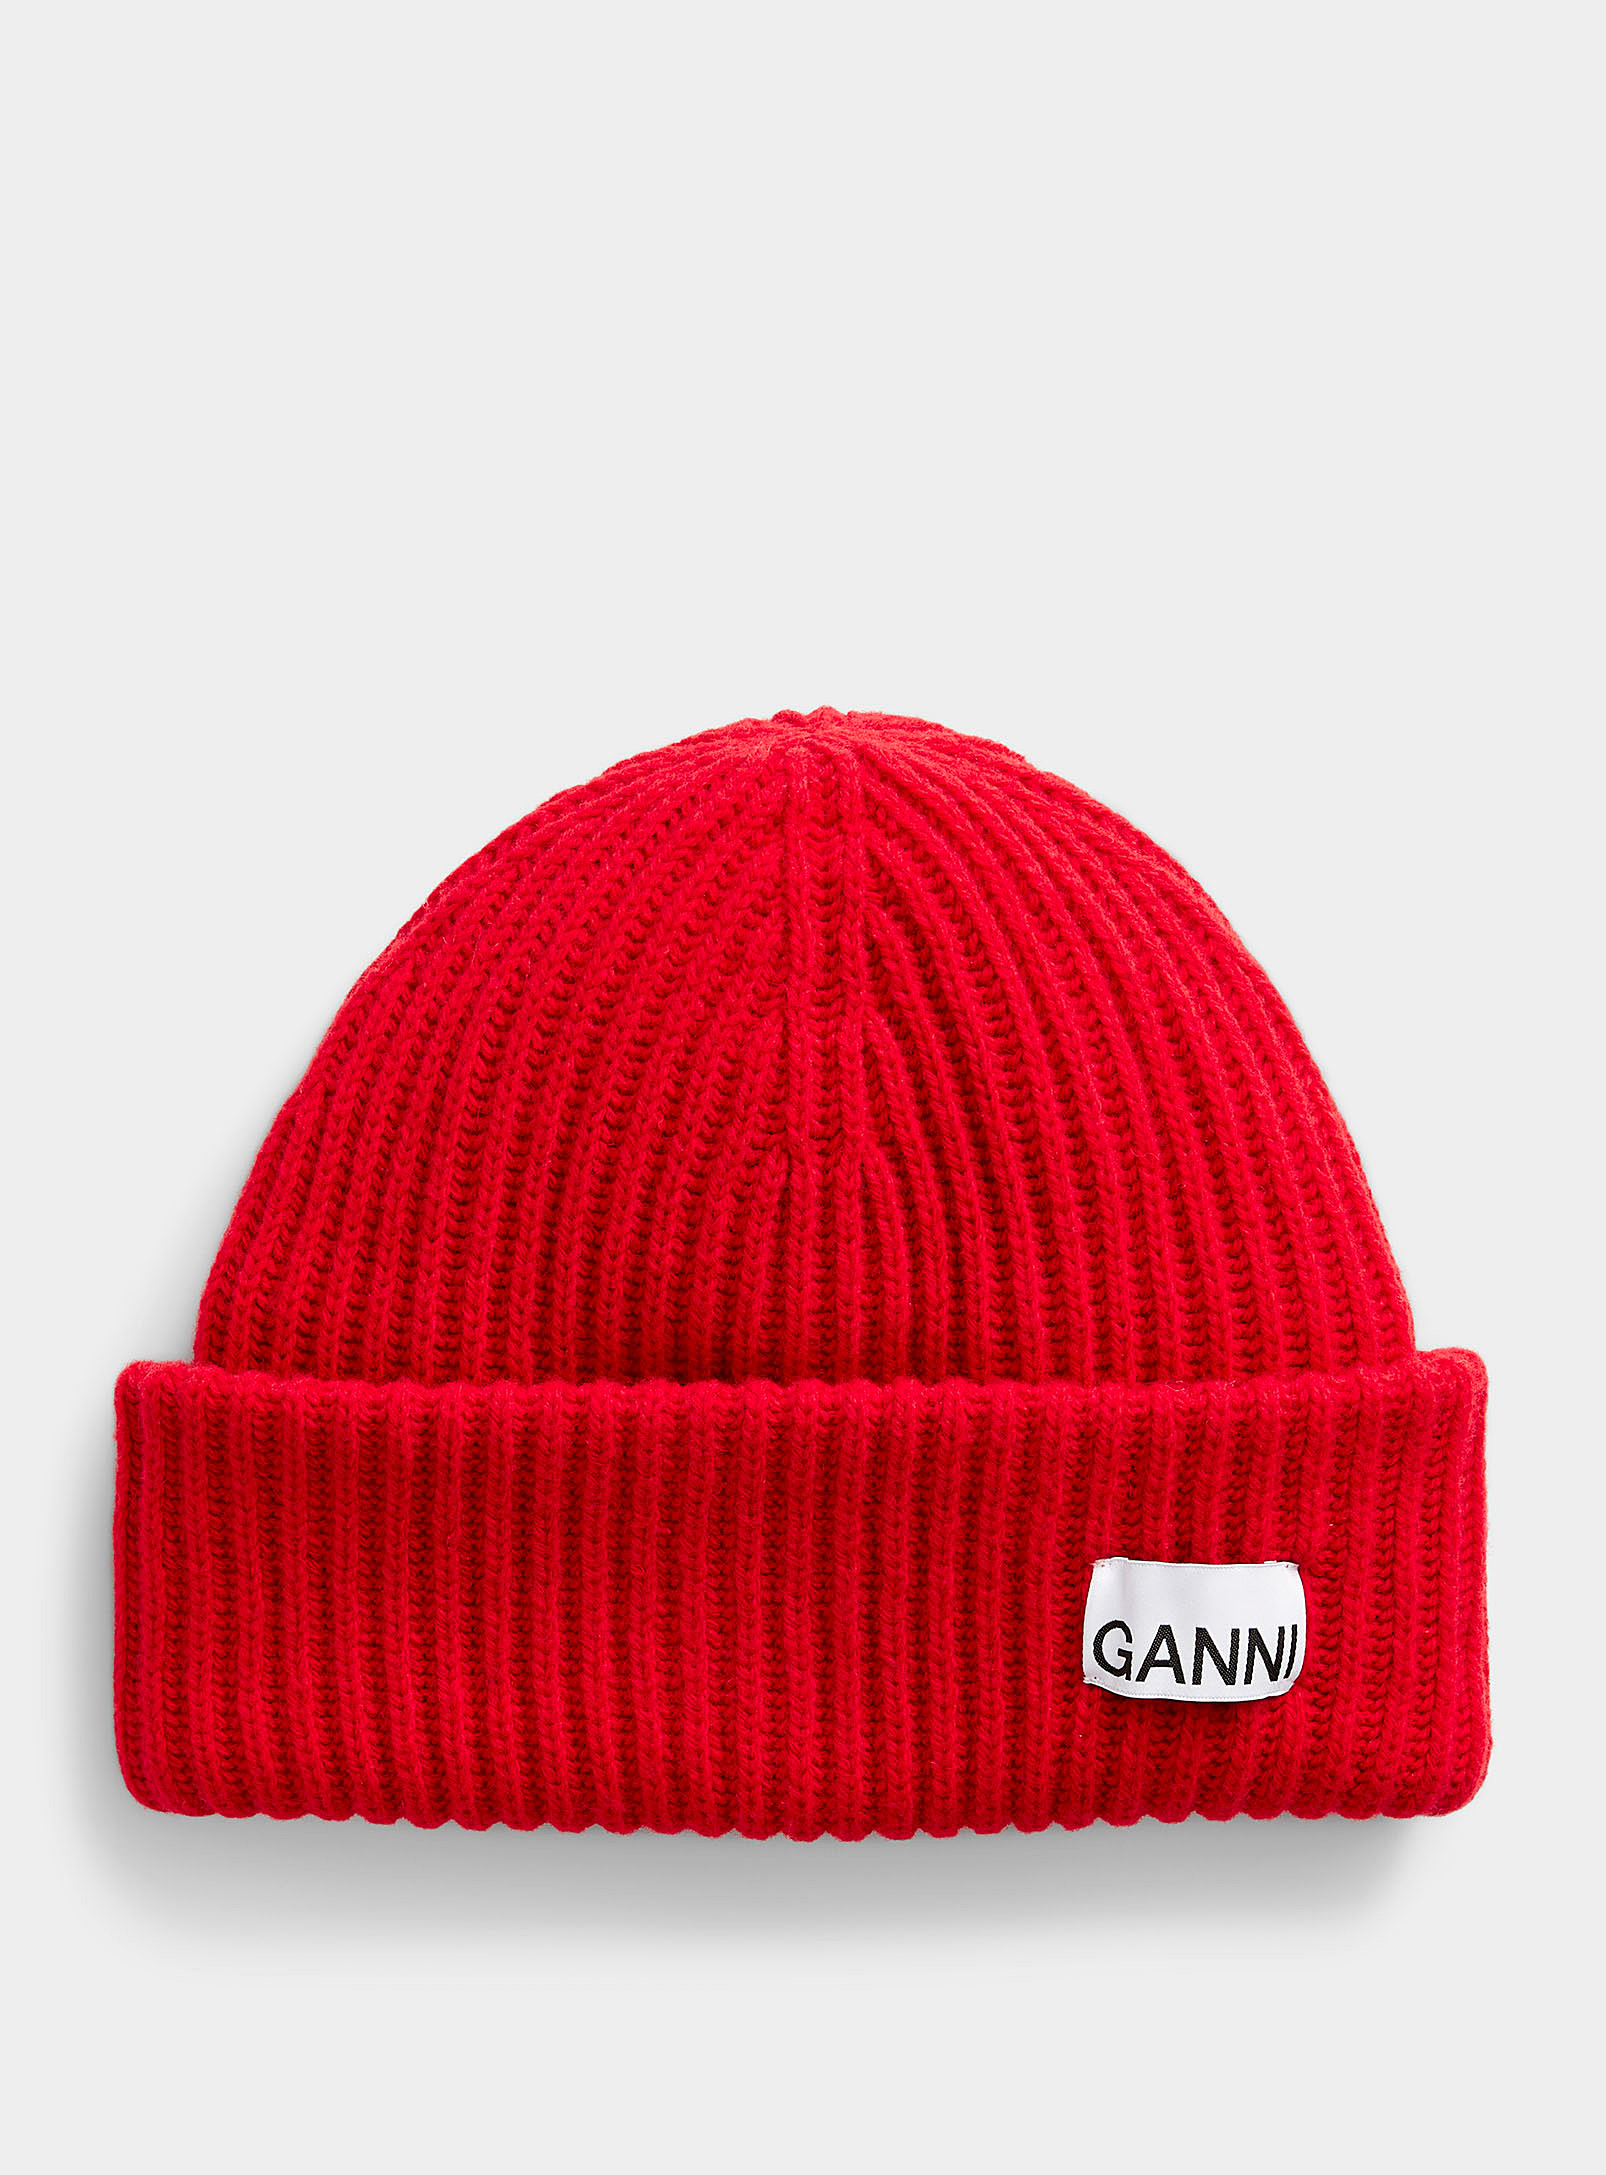 Ganni Red Logo Wool Tuque In Bright Red